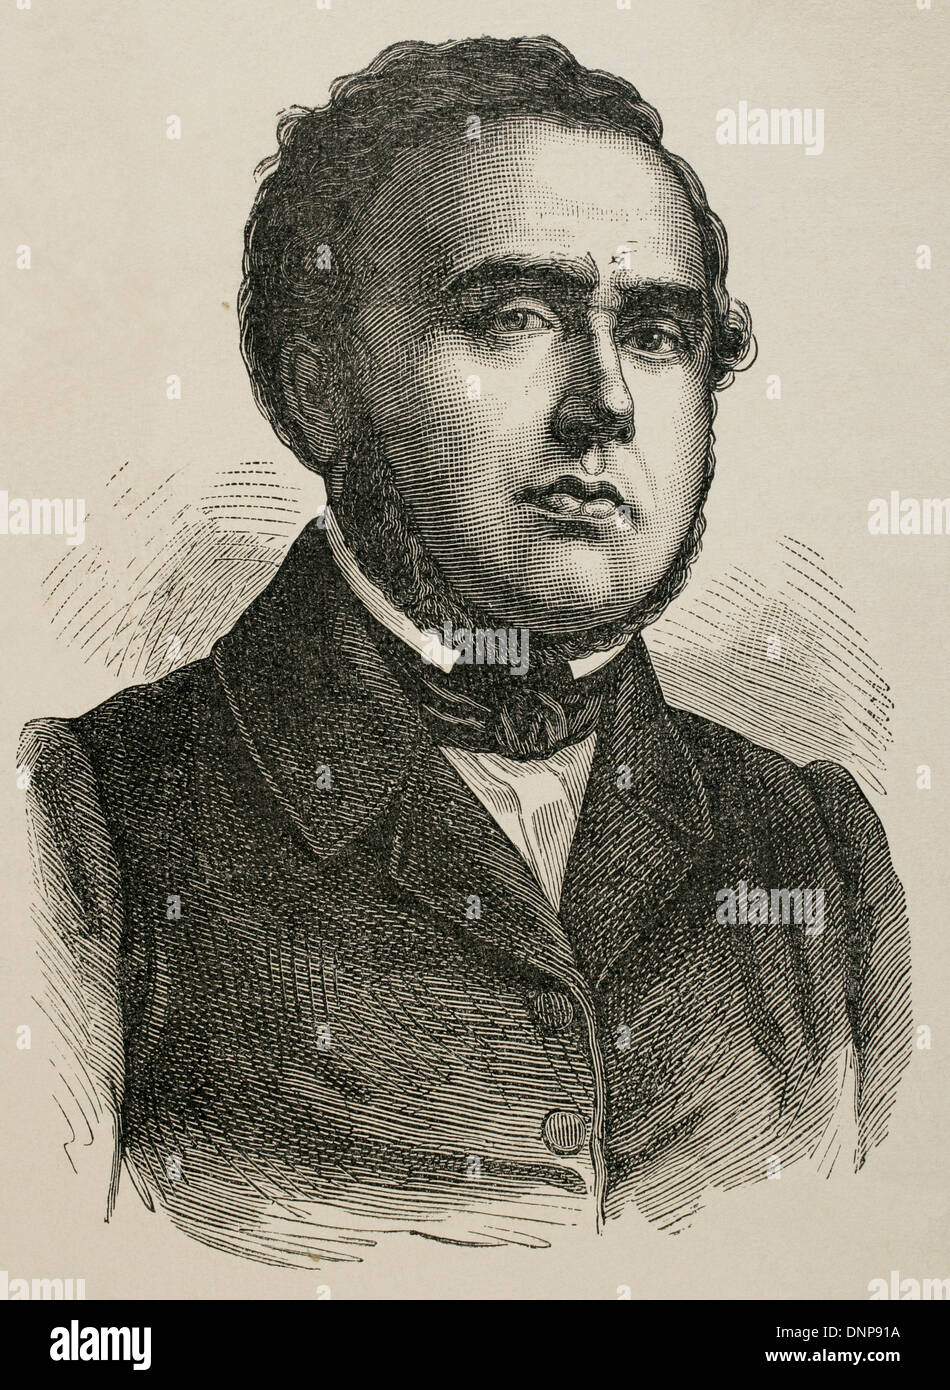 Alexandre Auguste Ledru-Rollin (1807-1874). French politician. Engraving in History of France, 1883. Stock Photo